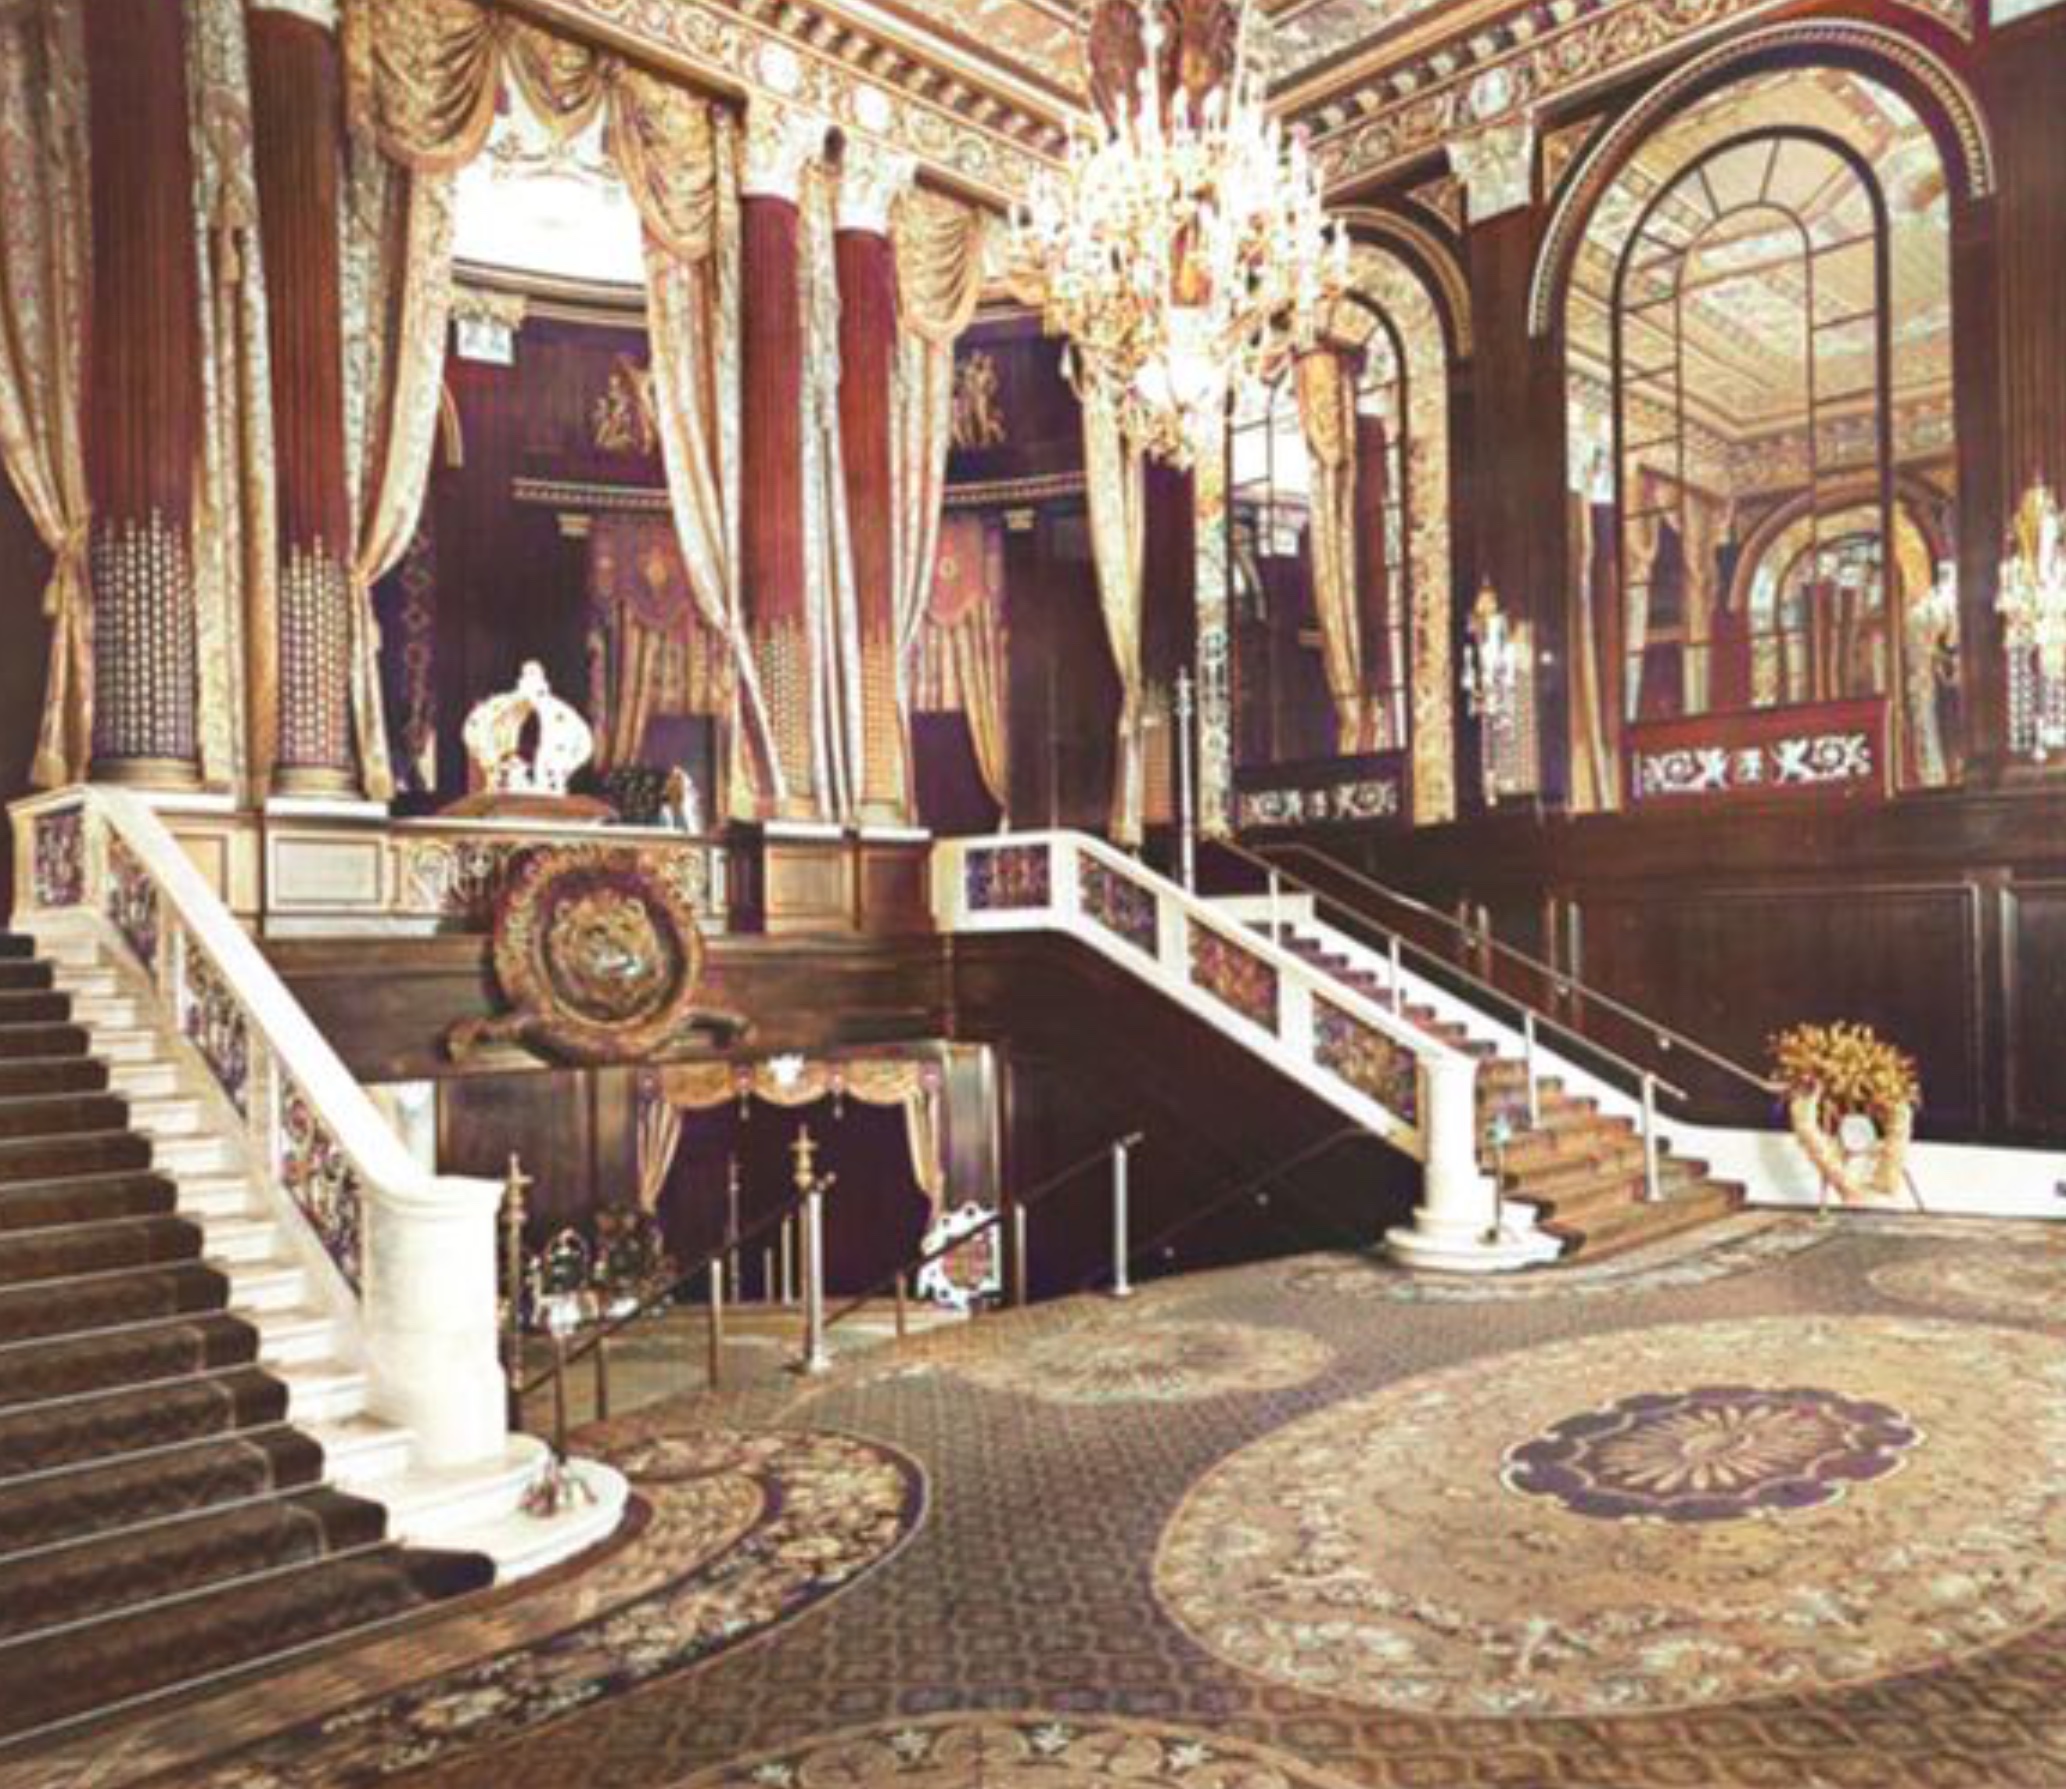 The foyer of the Empire, Leicester Square (colourised)